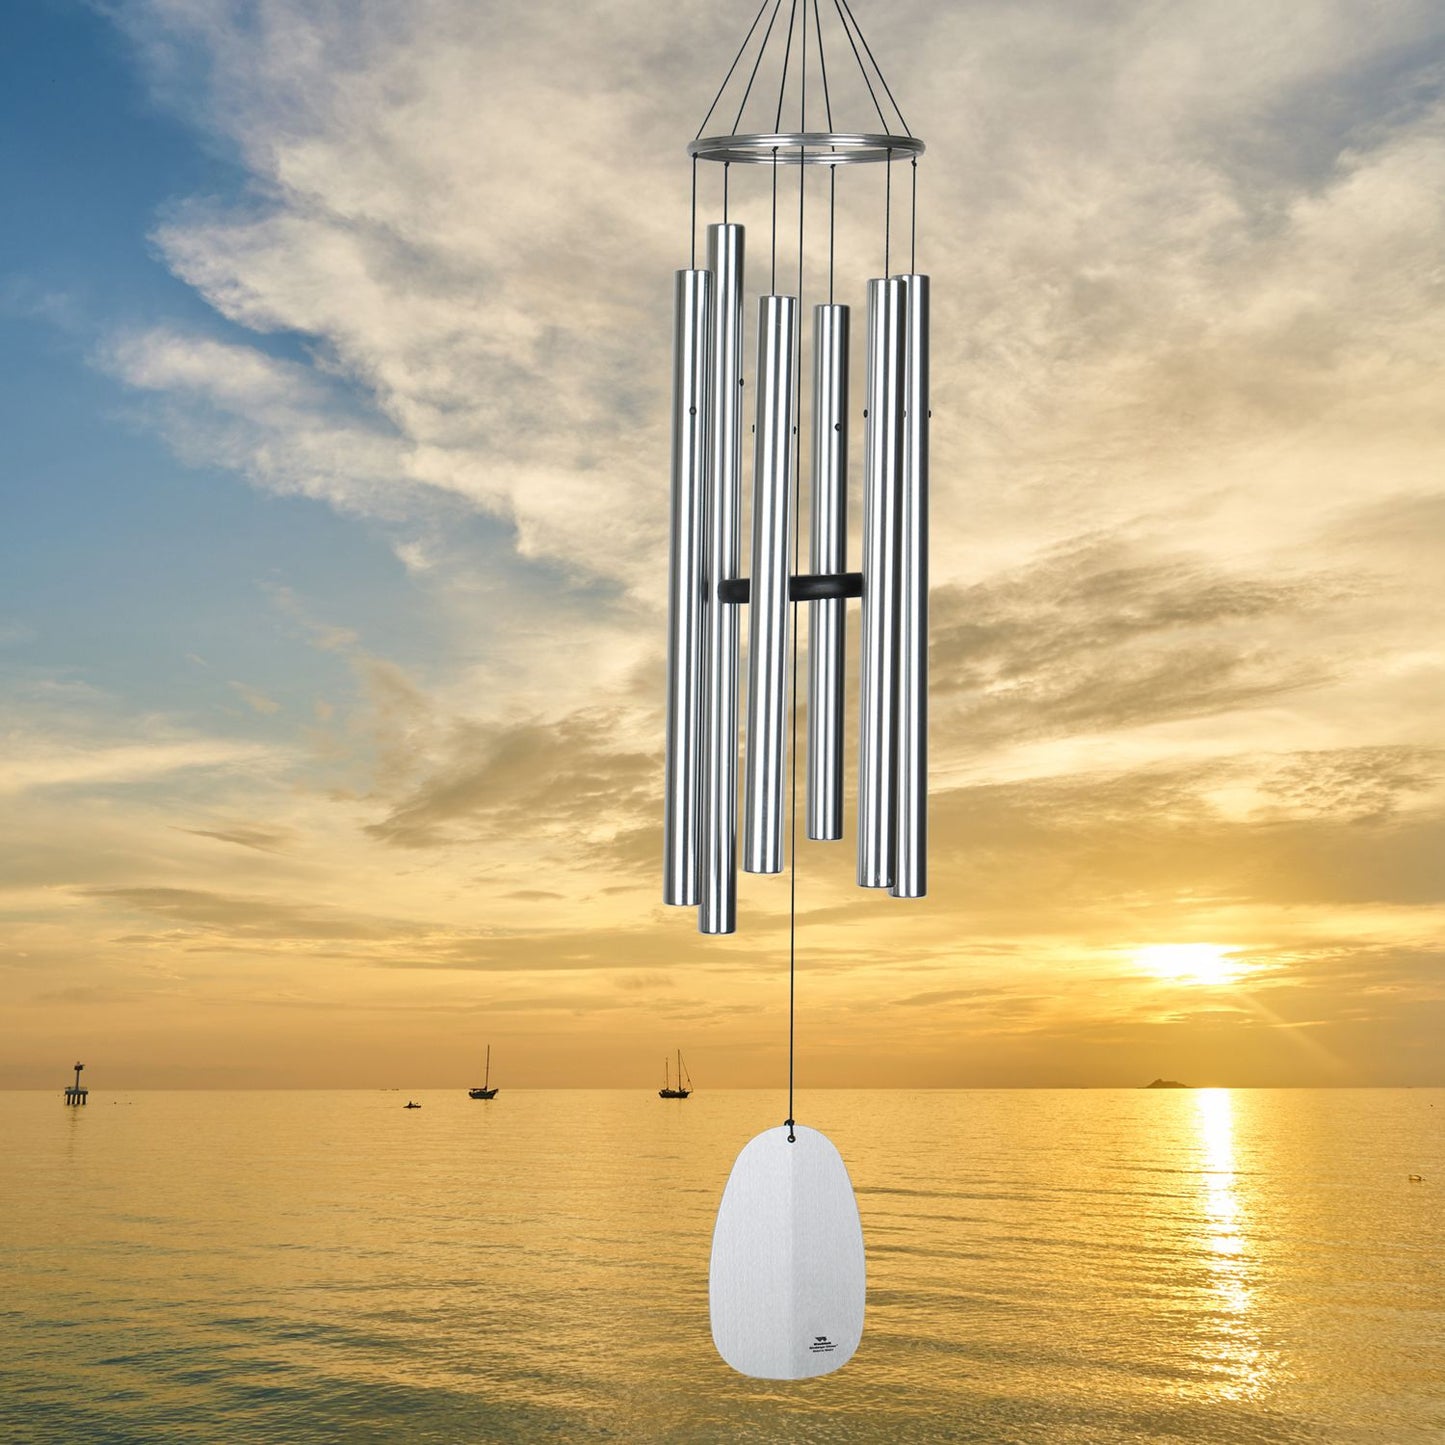 49" Windsinger Amazing Grace Wind Chime by Woodstock | Outdoor Wind Chimes | Housewarming Gifts | Gifts for Mom